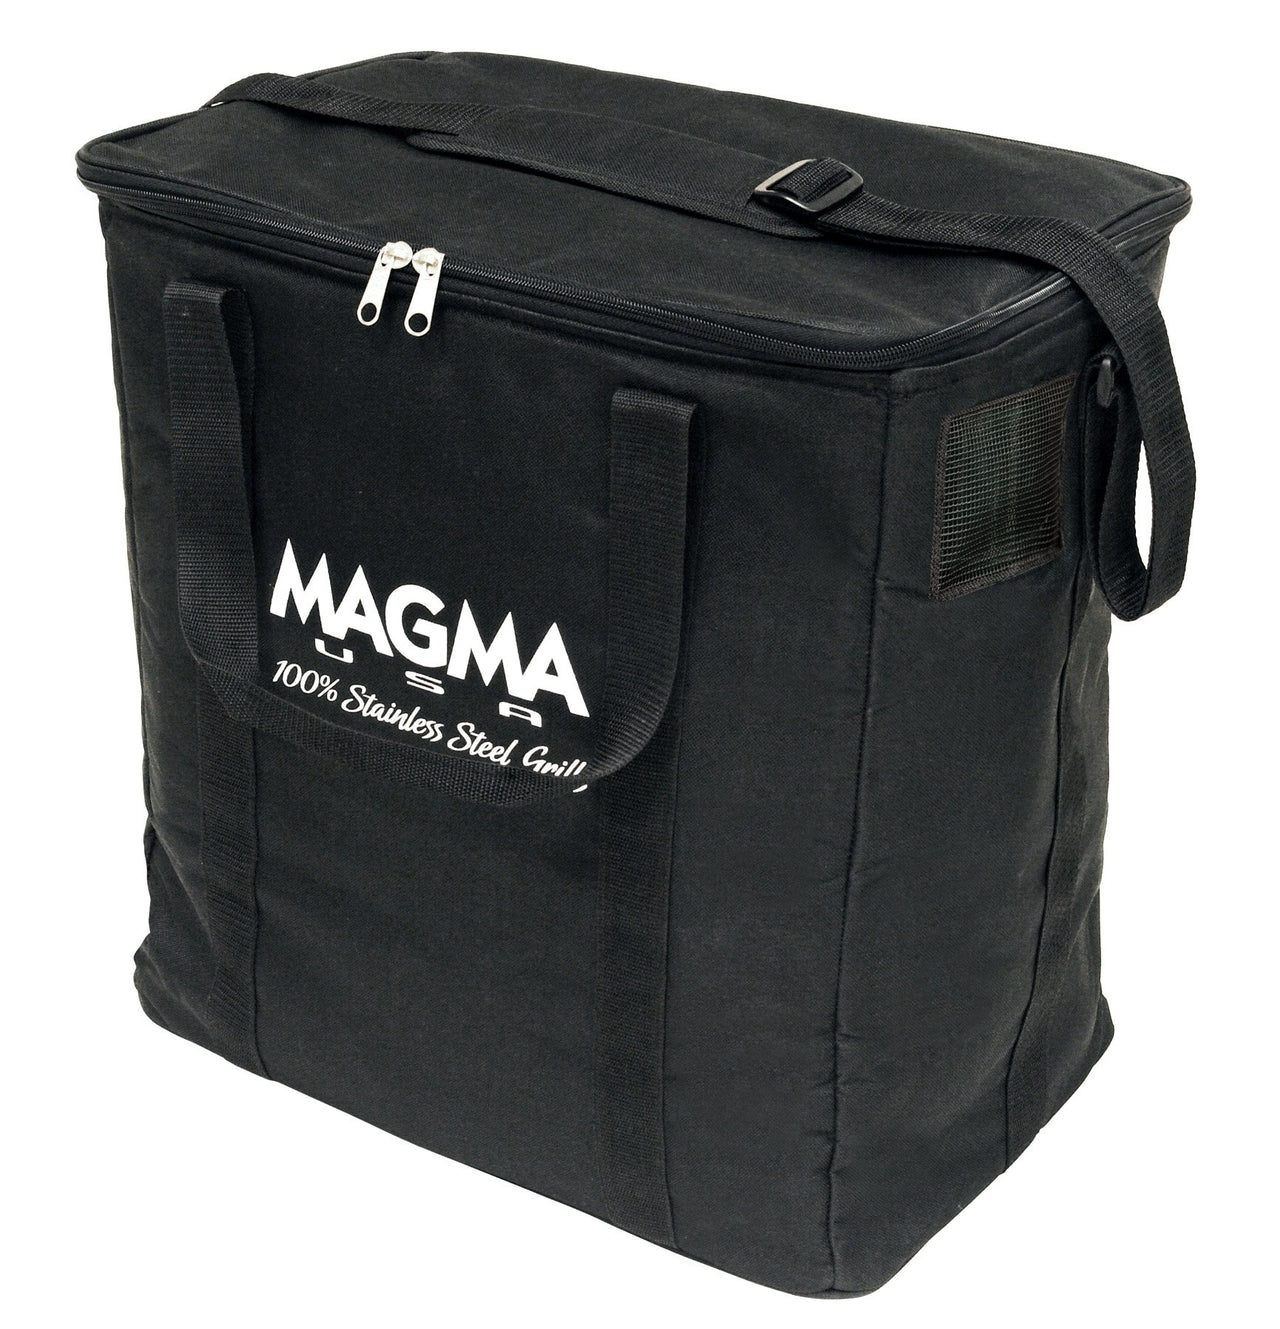 Magma BBQ Case Carry/Store Kettle Grill A10-991 | 24